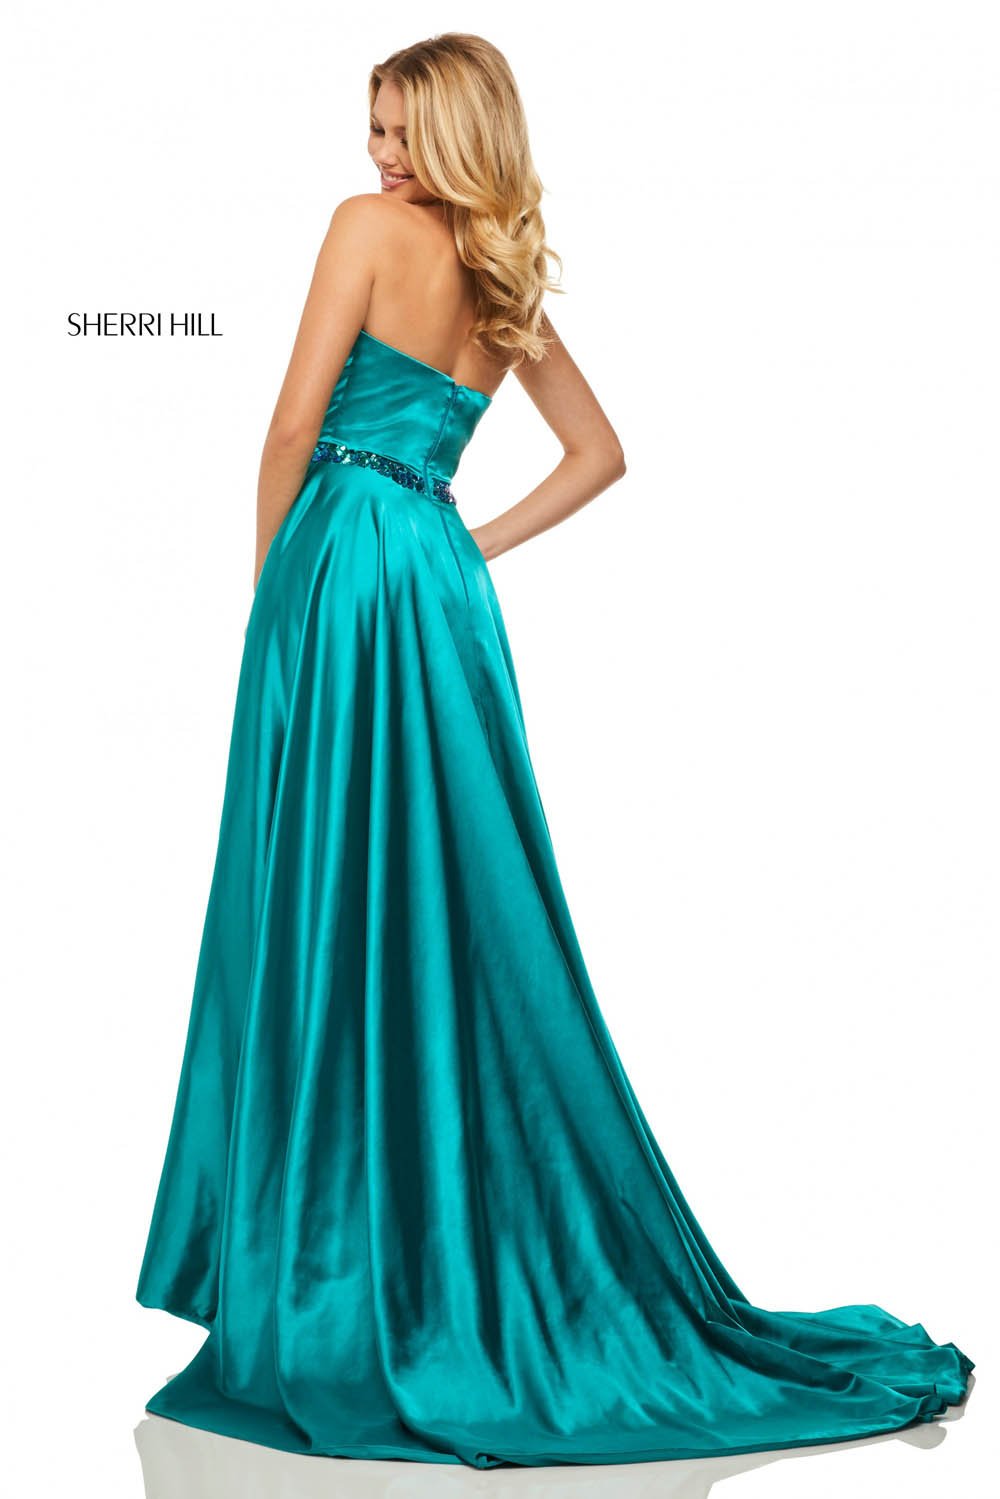 Sherri Hill 52841 dress images in these colors: Purple, Fuchsia, Teal, Turquoise, Emerald, Wine.